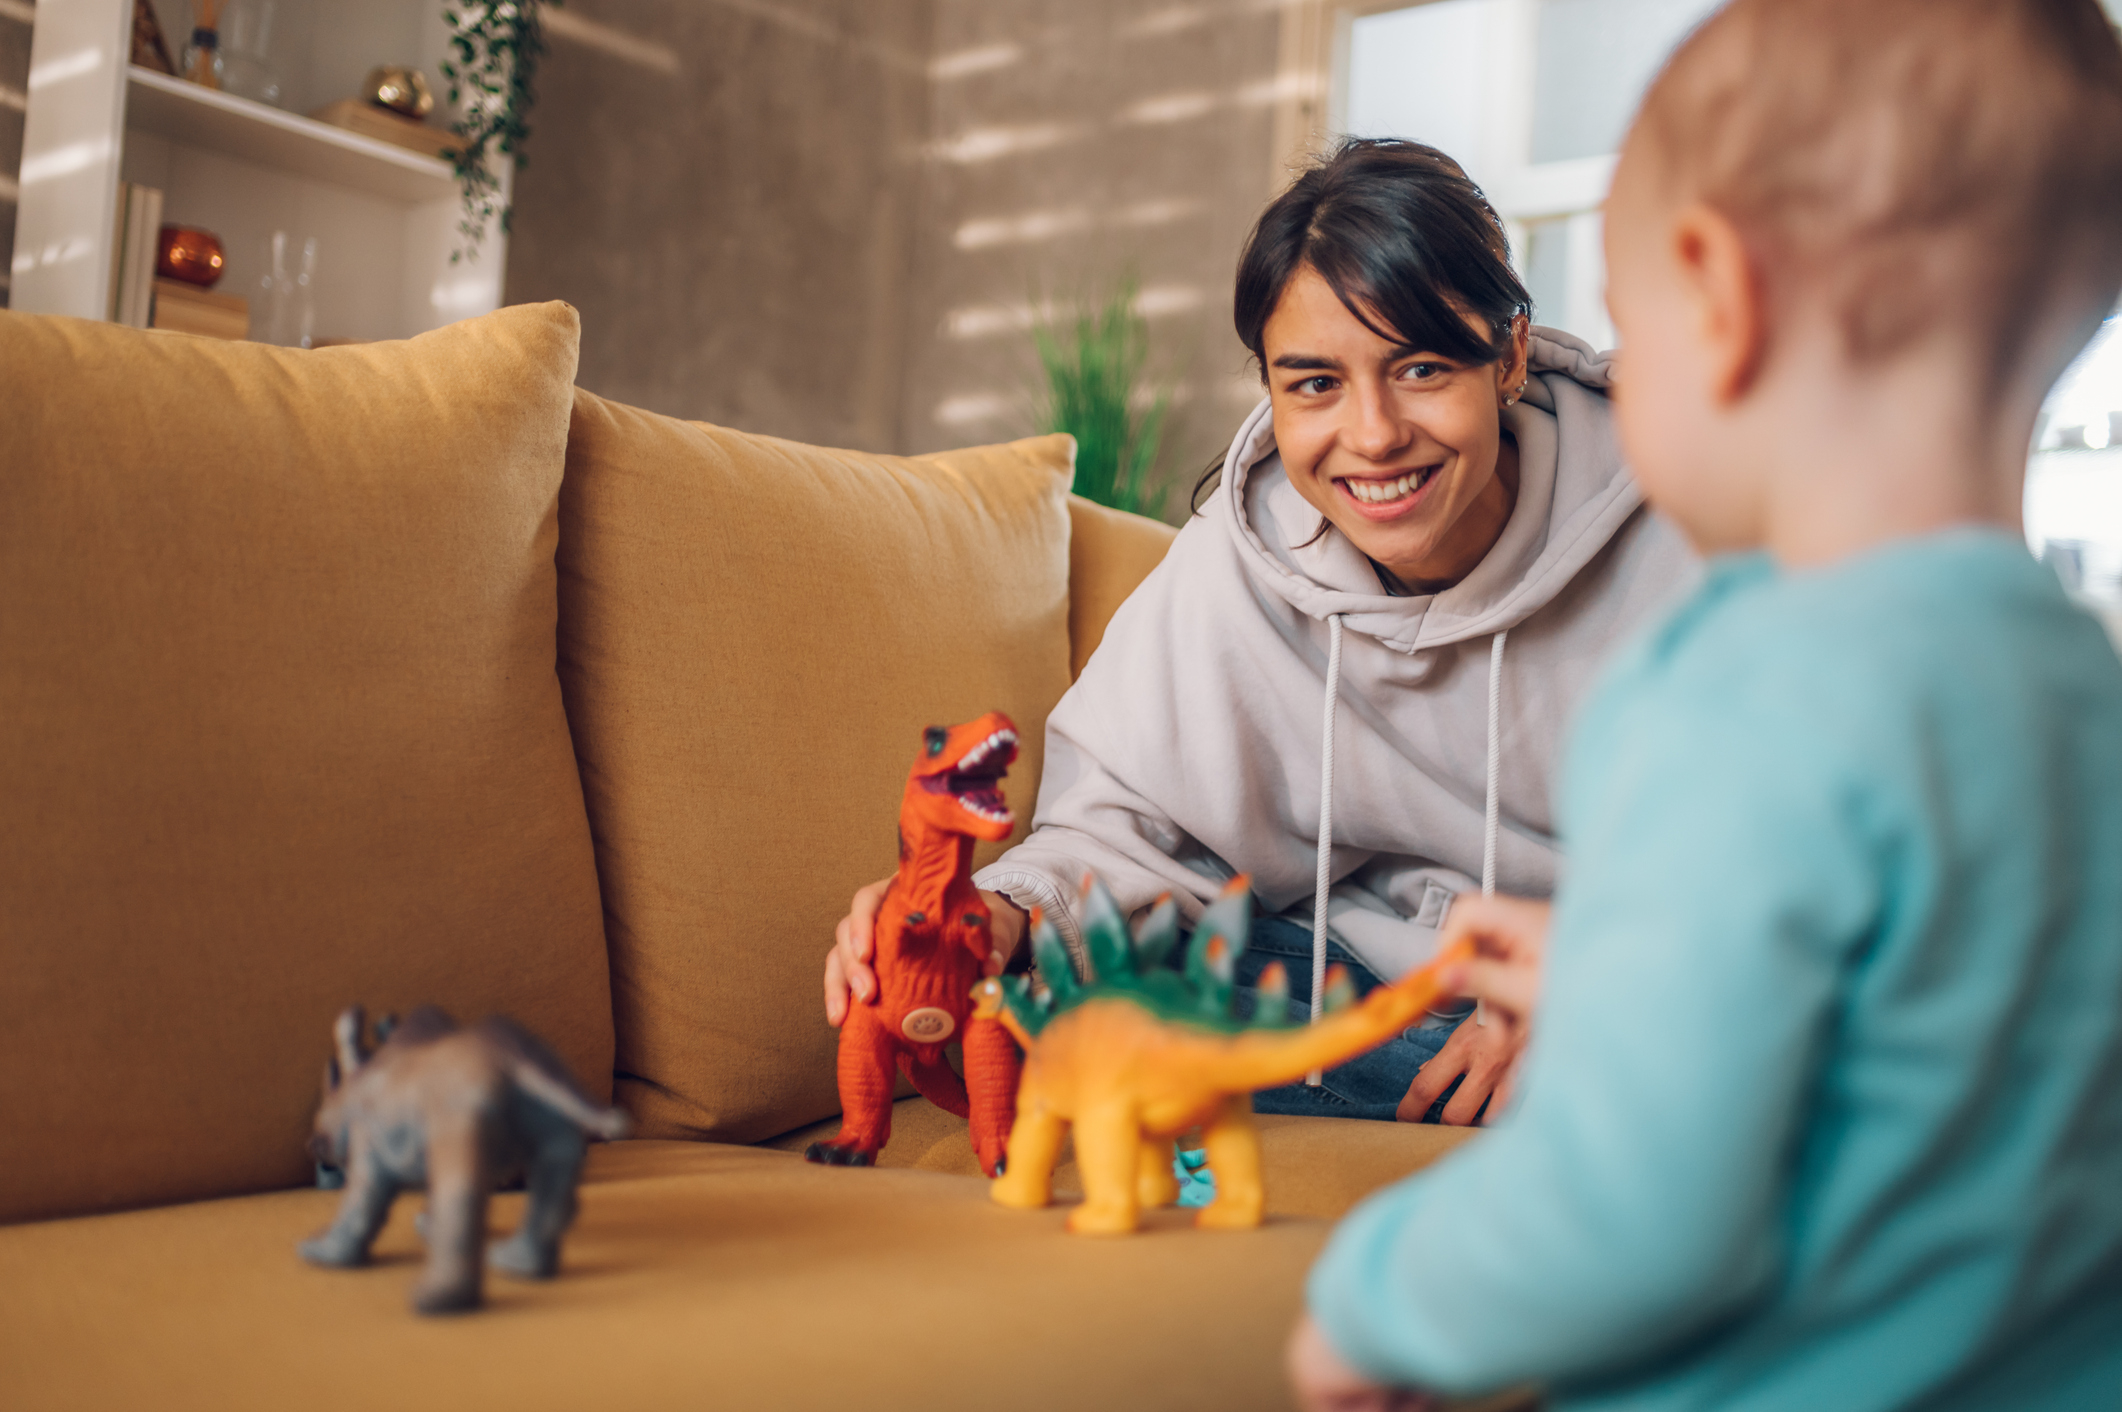 Adult and child playing with dinosaur toys on a sofa